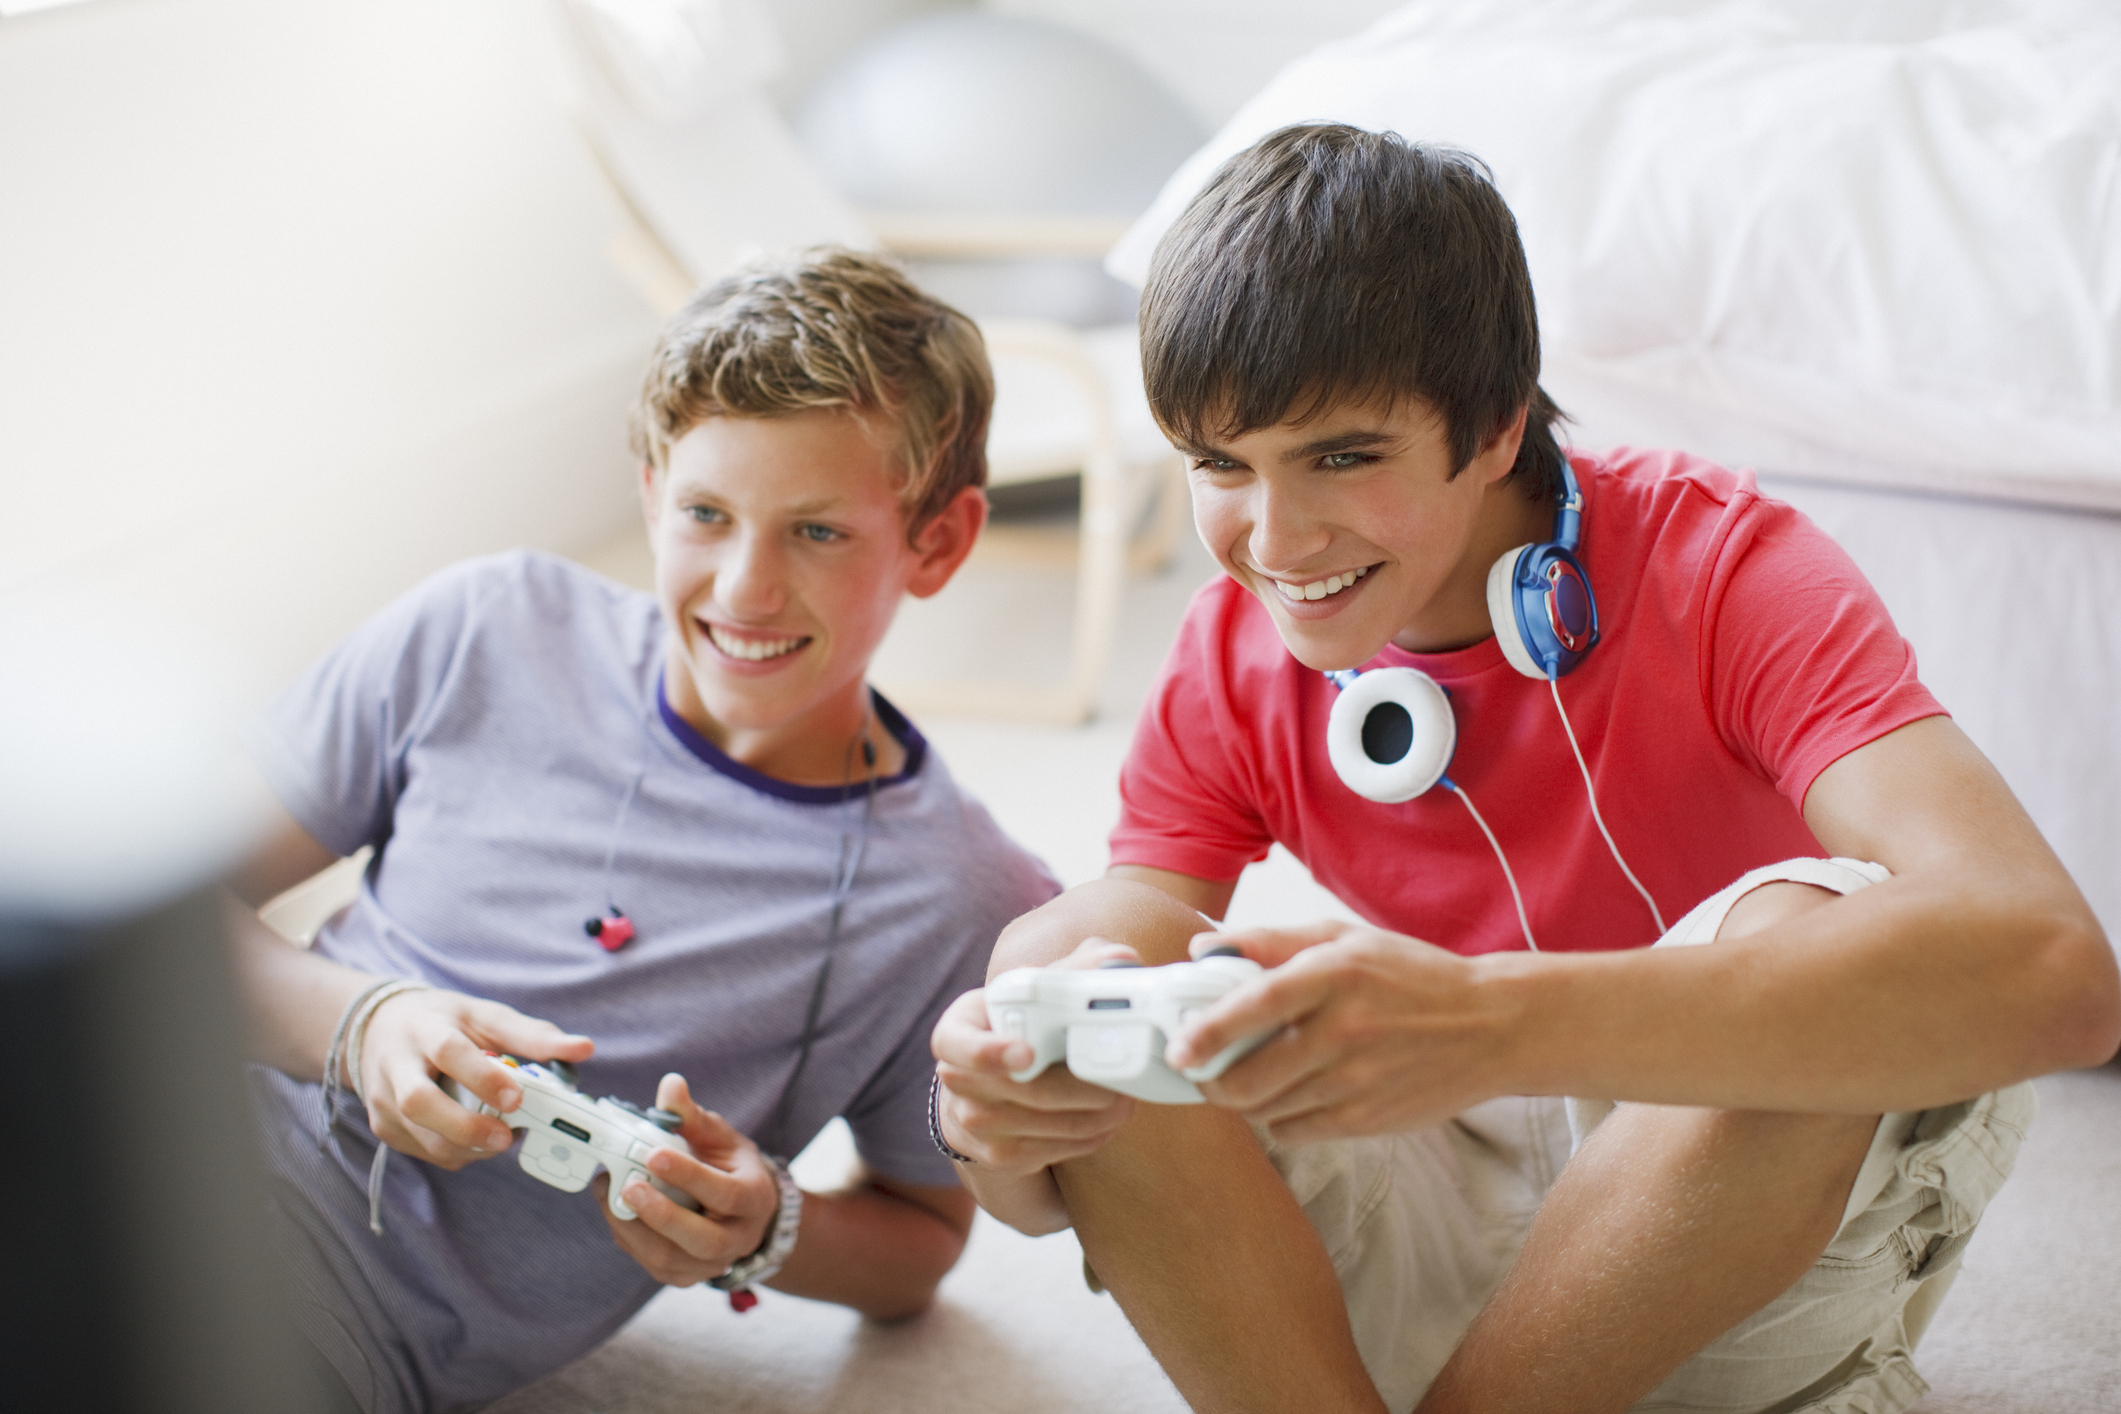 Playing online games is linked to better performance at school among  teenagers